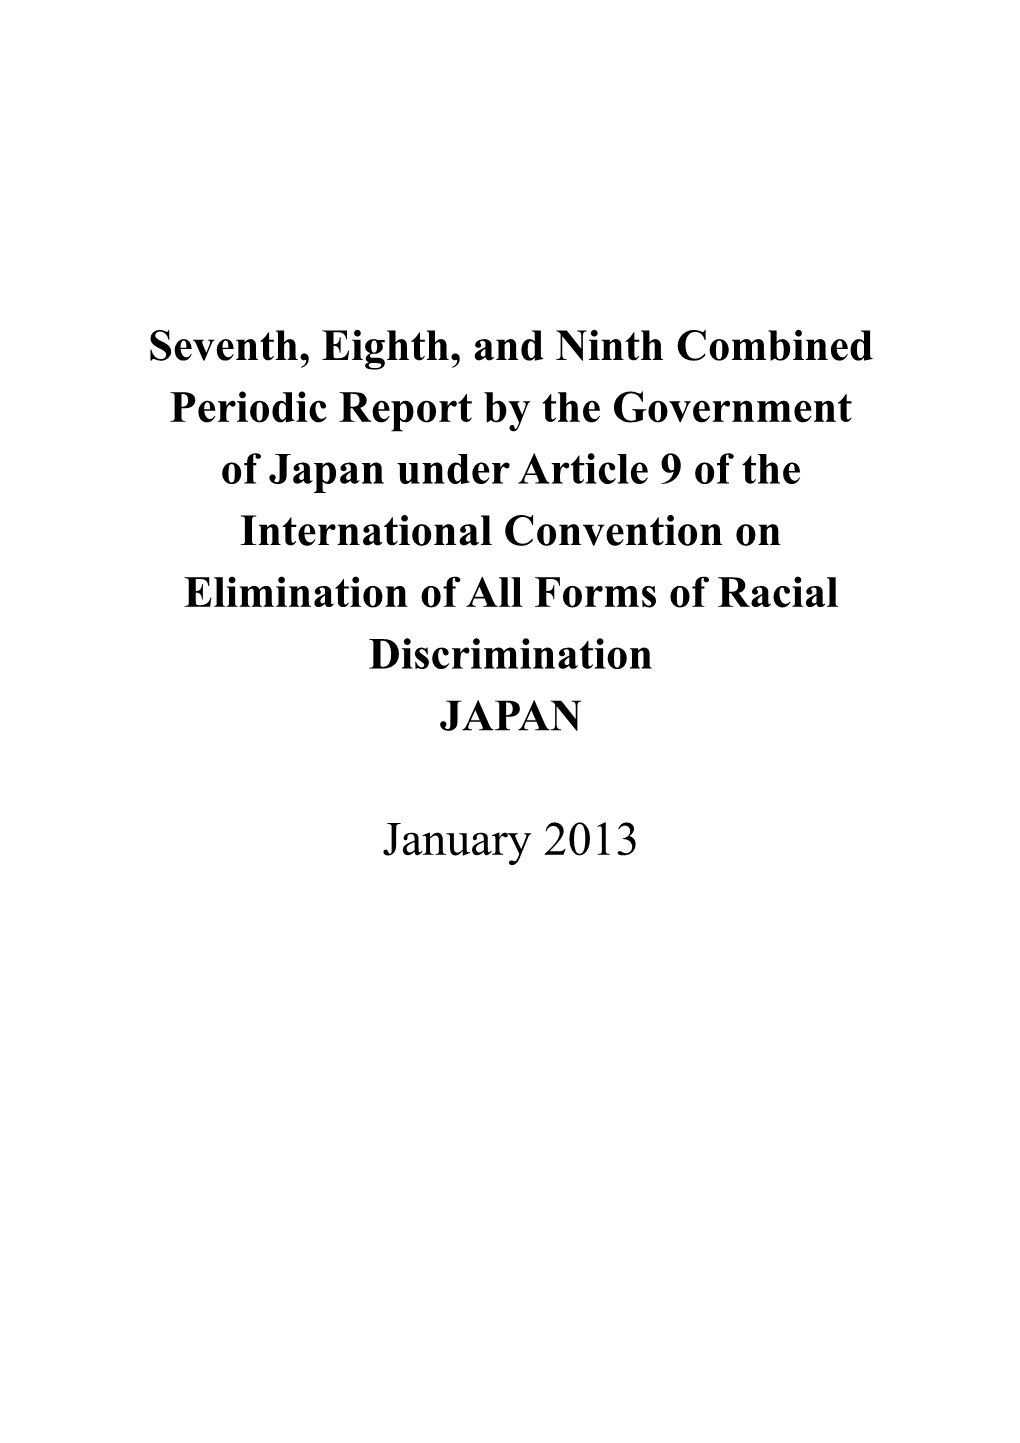 Seventh, Eighth, and Ninth Combined Periodic Report by the Government of Japan Under Article